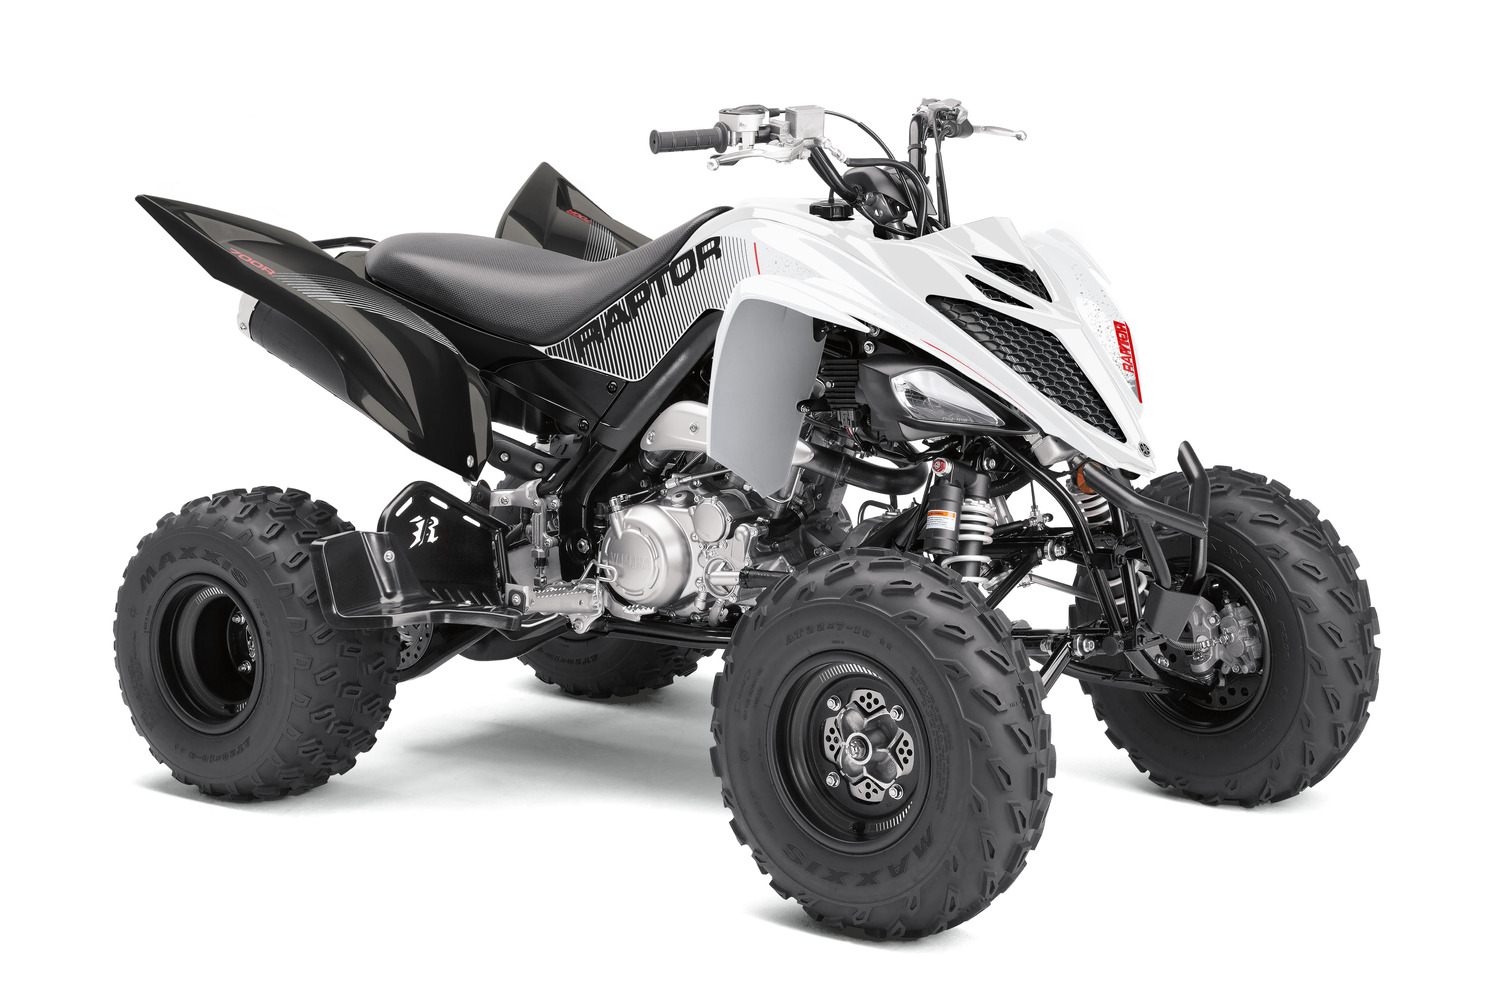 2020 Yamaha RAPTOR 700 - 686cc Prices and Values